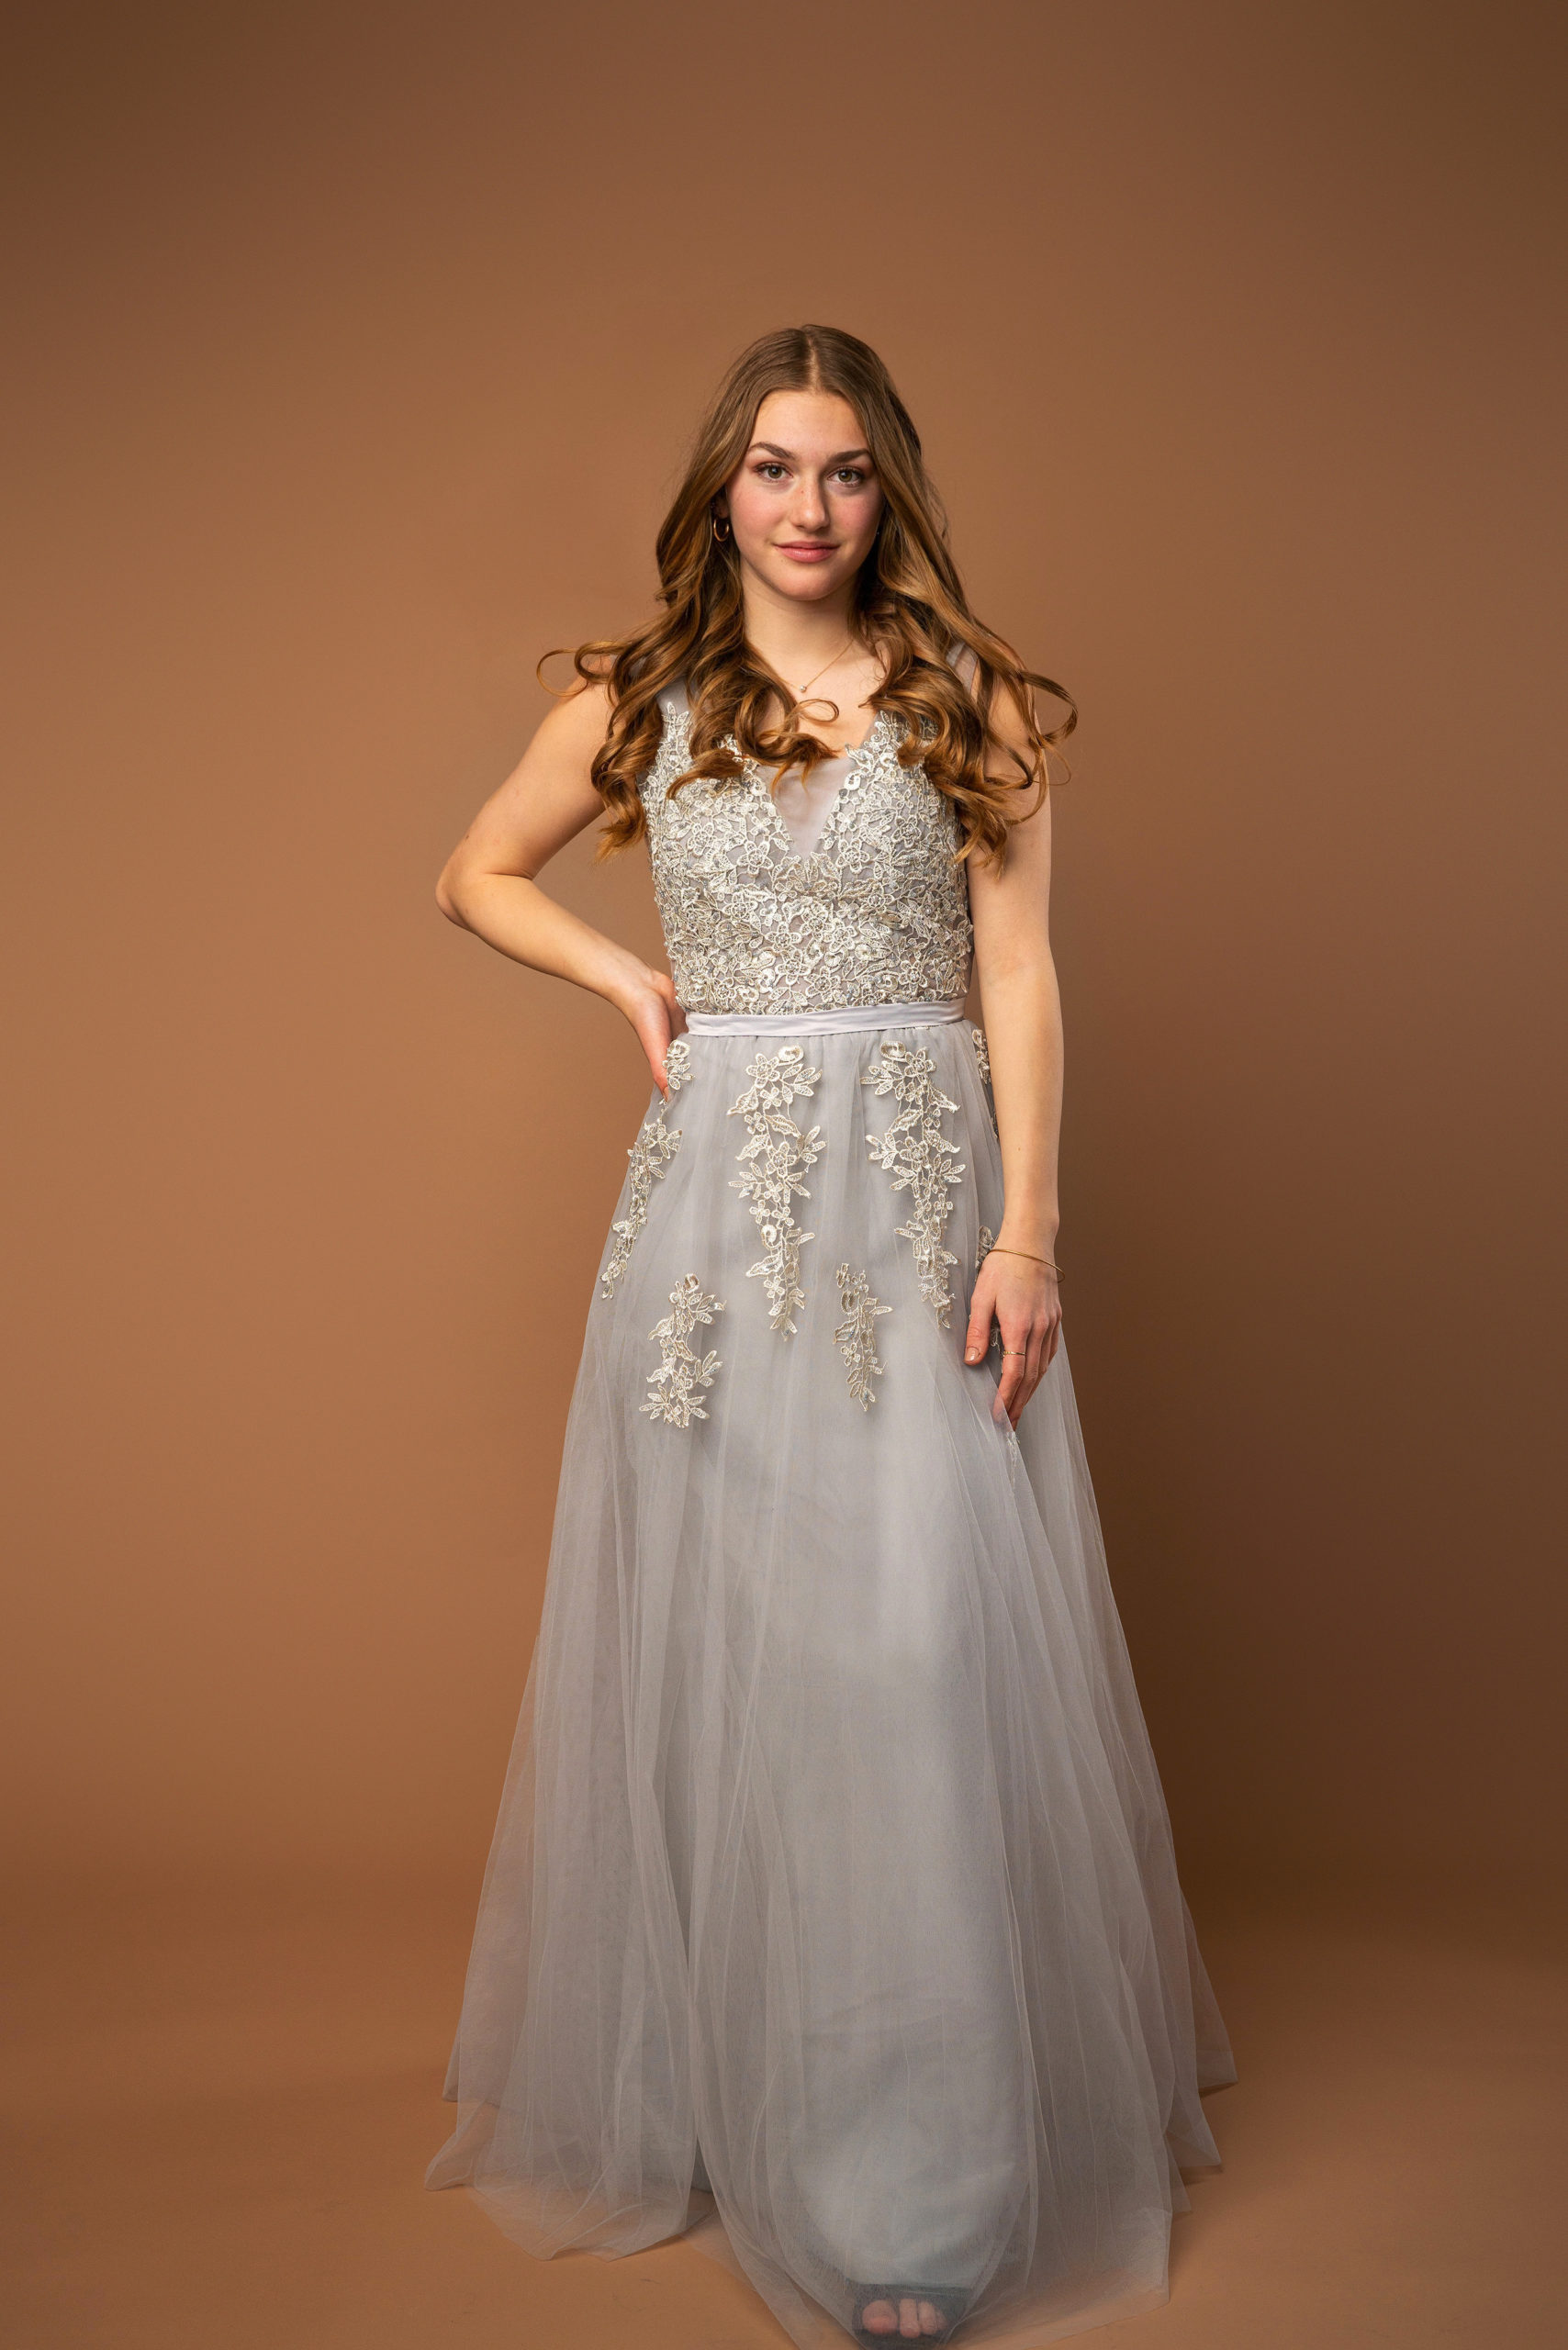 Gray Sleeveless Chiffon Gown with Lace Embellishments